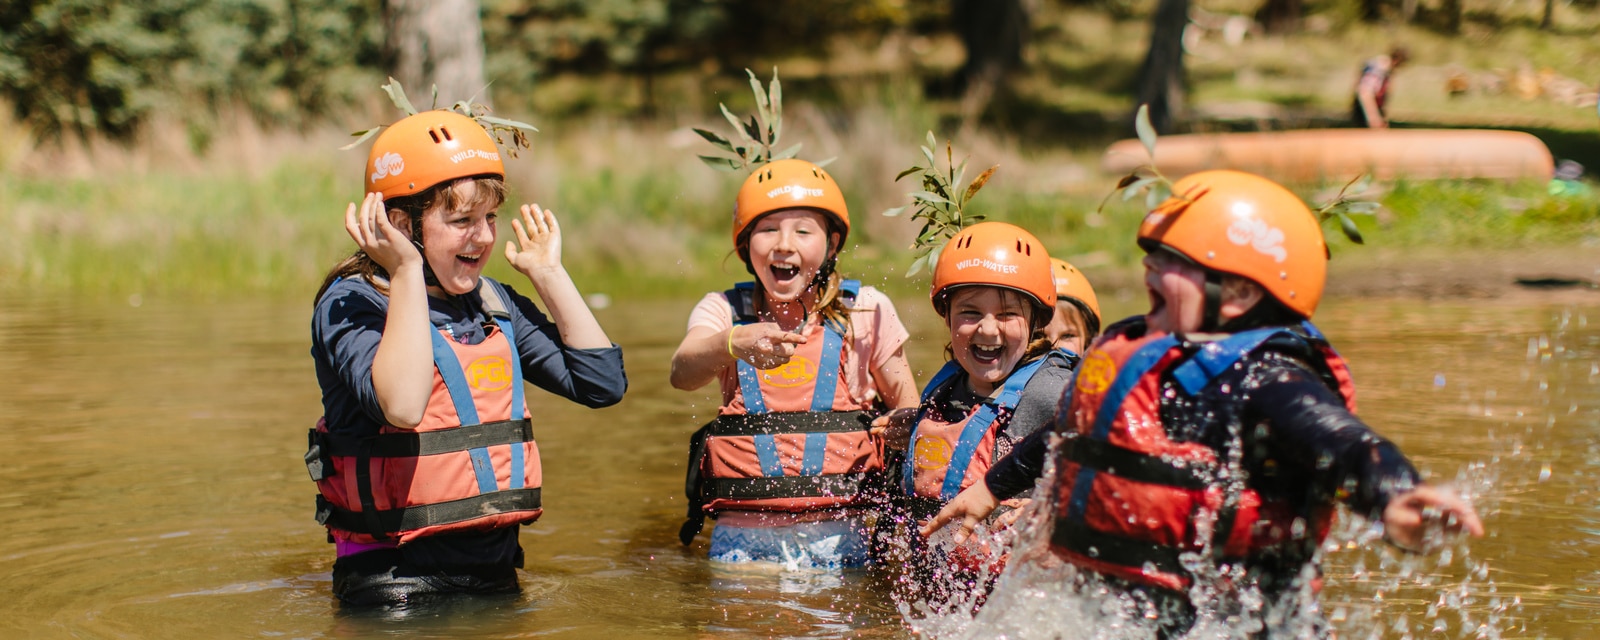 How Adventure Camps Help Build Resilience in Kids